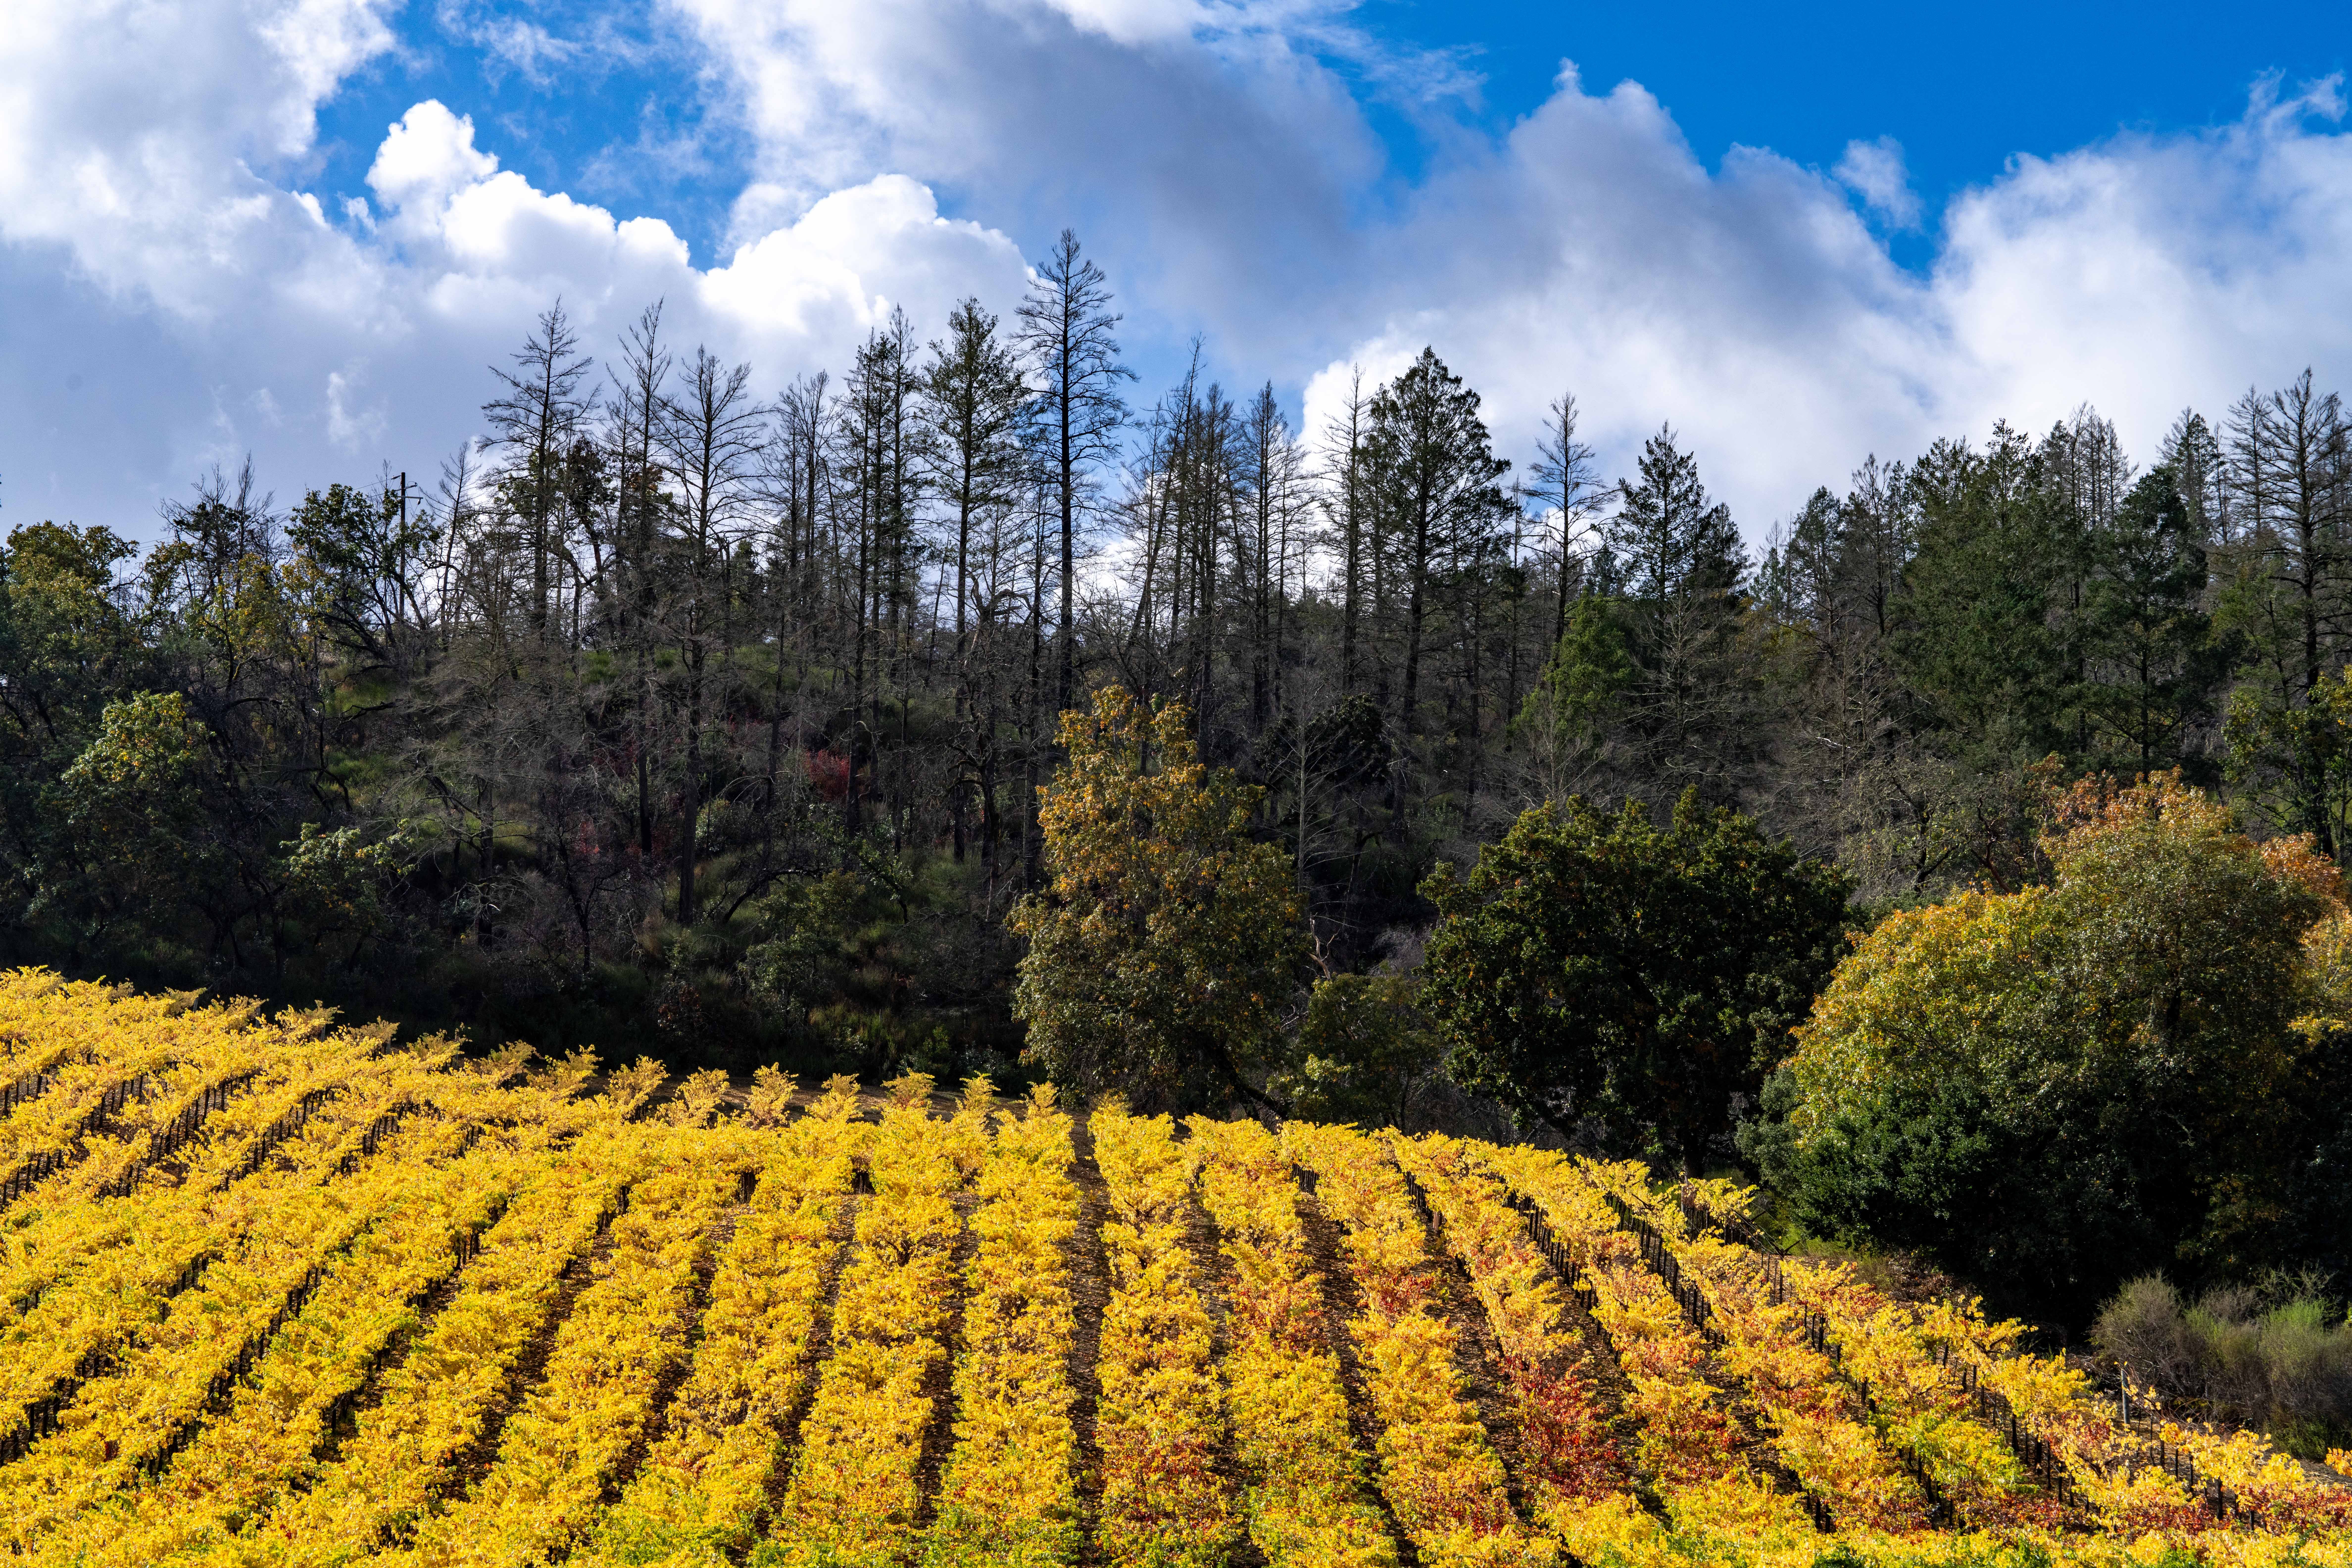 Napa Valley produces 4% of the state's wine and has 27.5% of the winery  permits